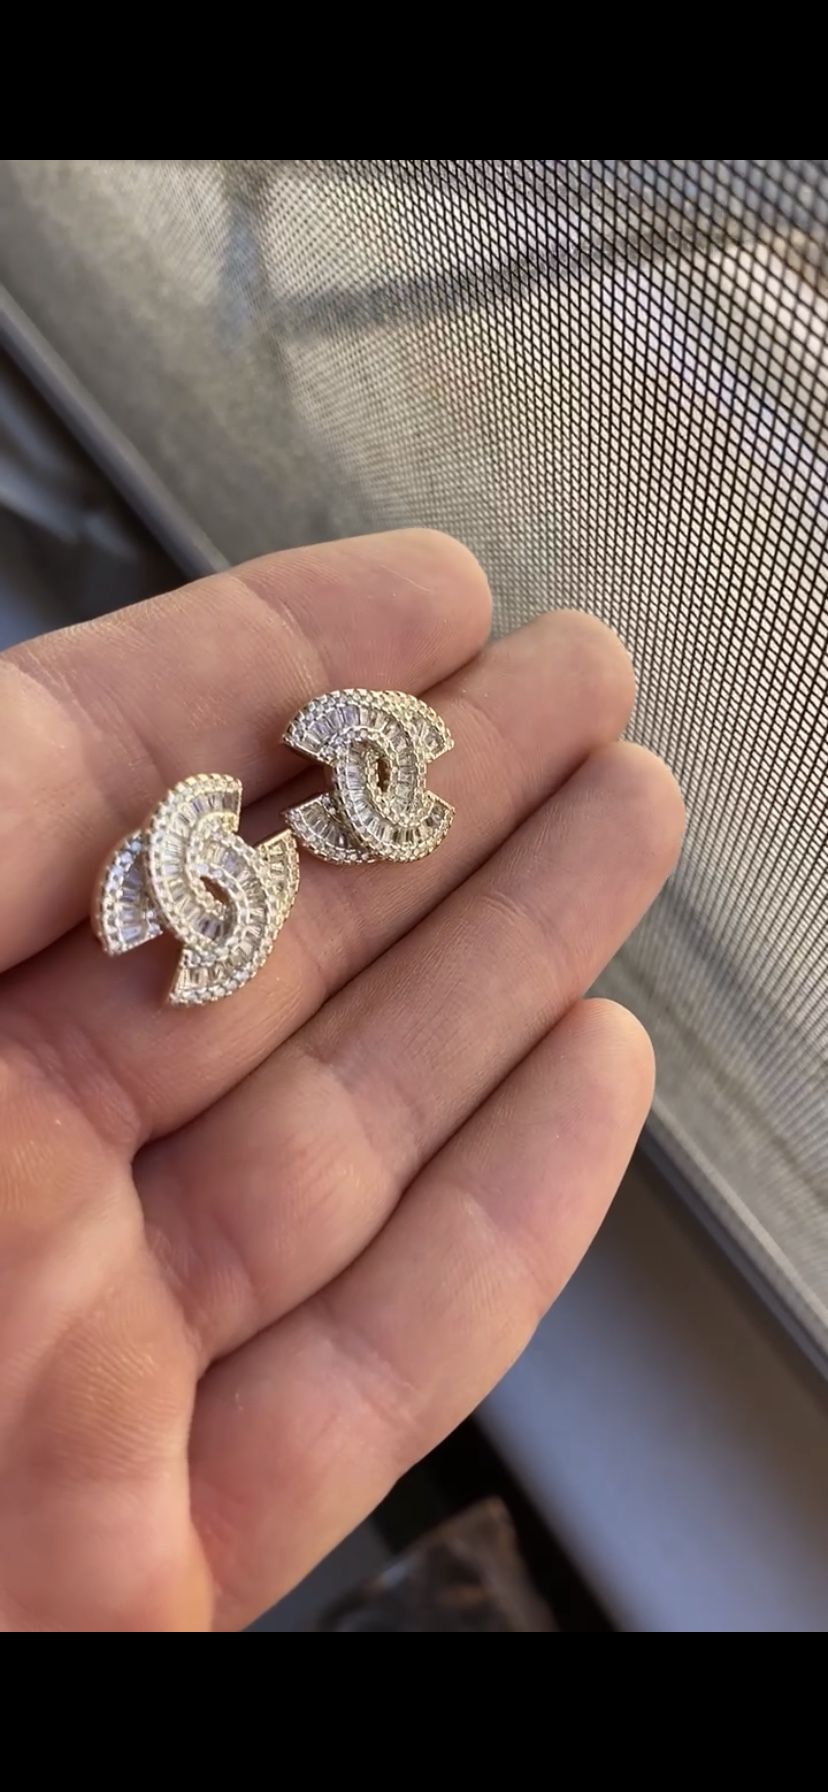 Chanel Earrings Gold for Sale in Los Angeles, CA - OfferUp